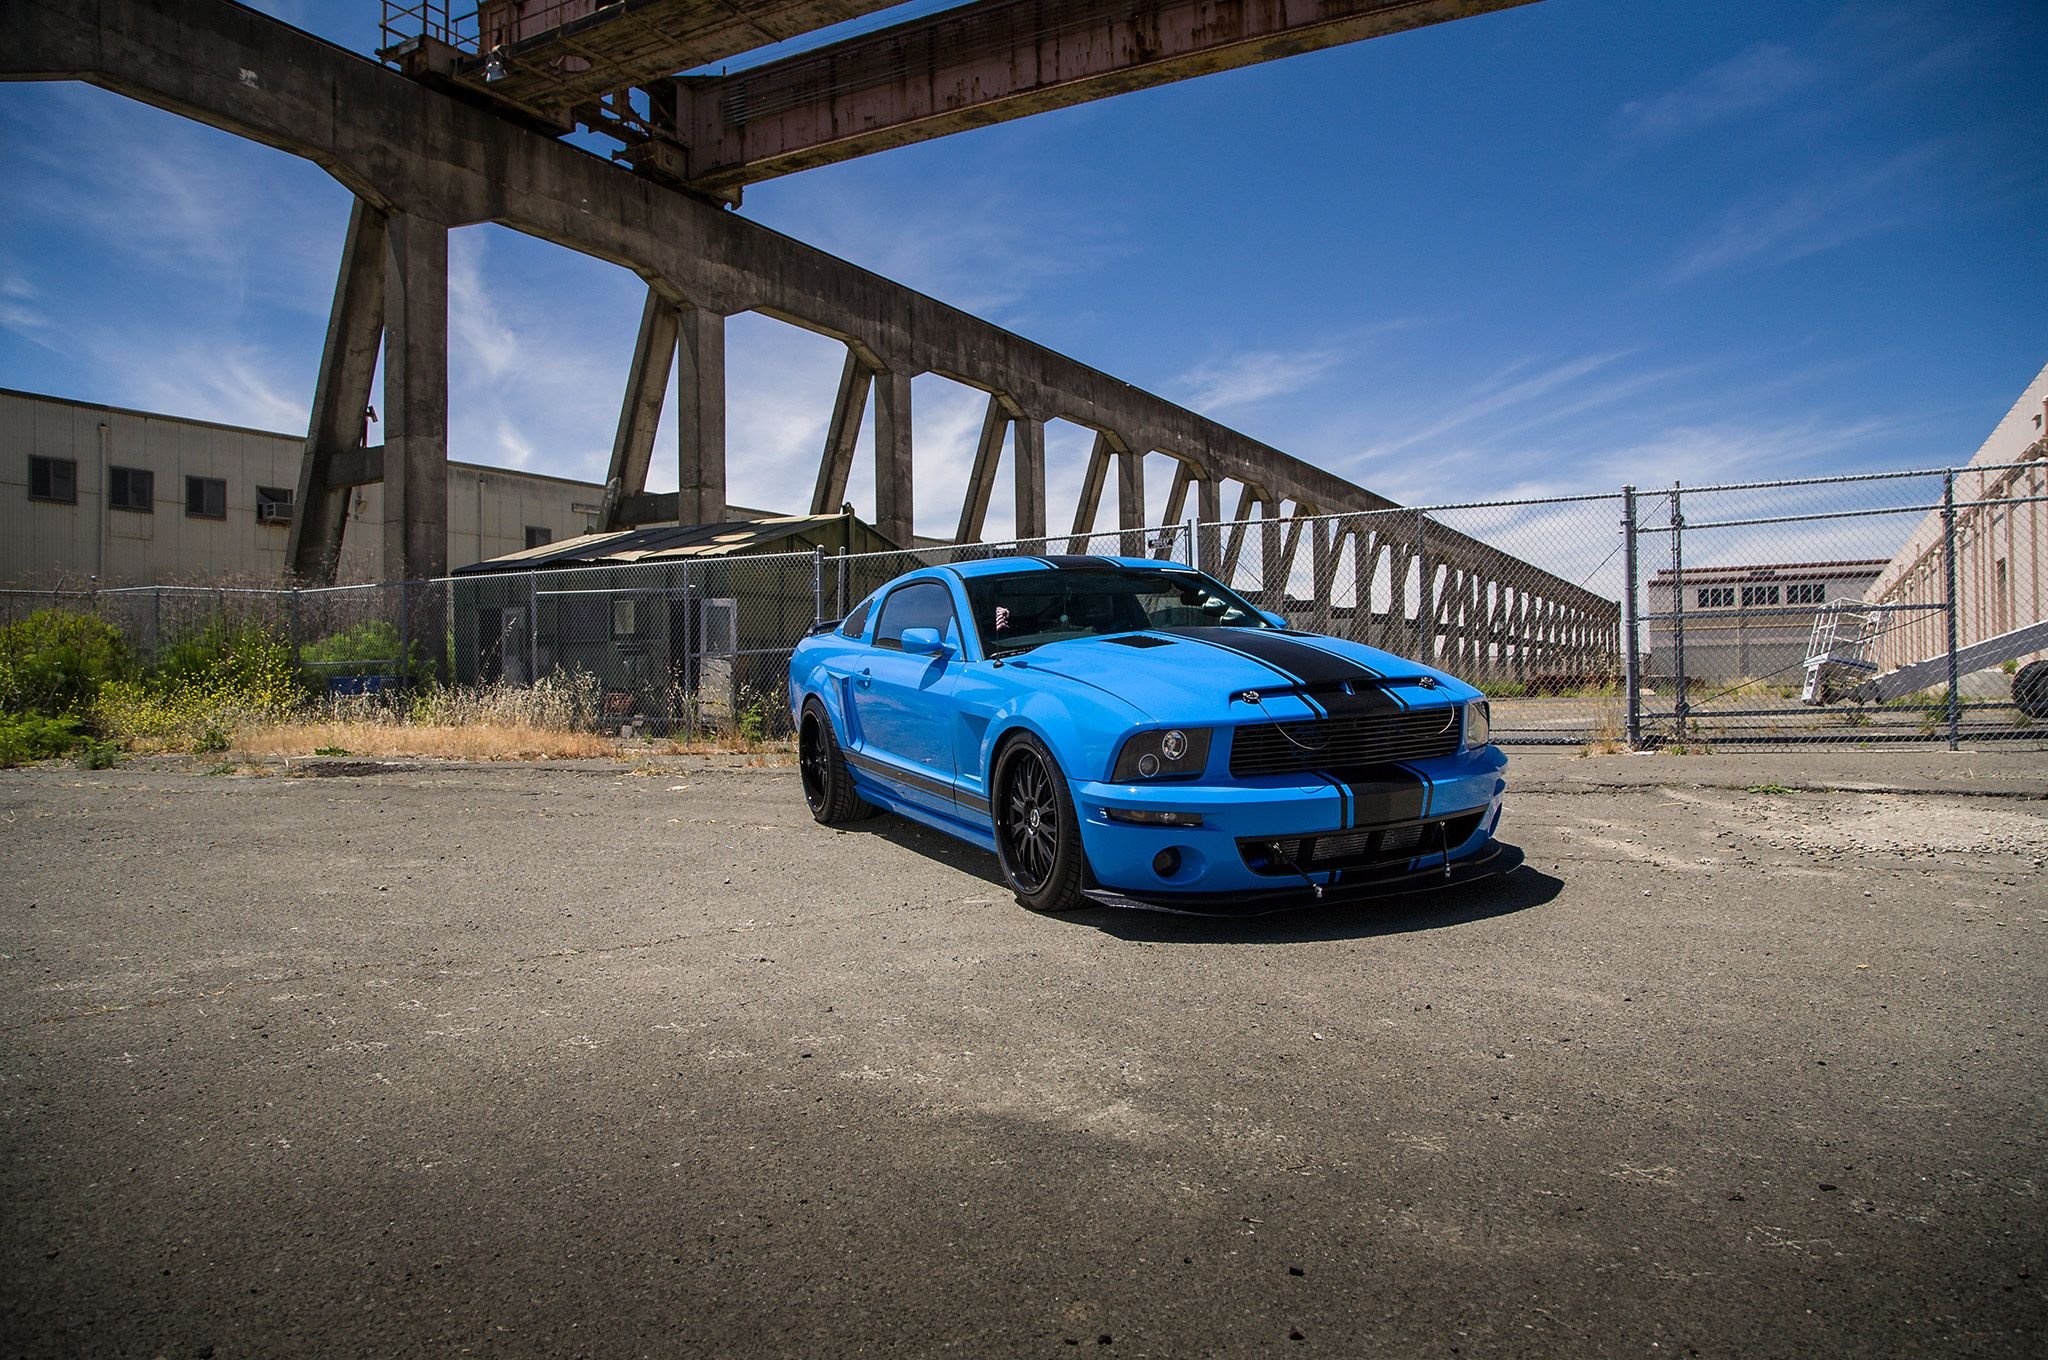 2005, Ford, Mustang, Shelby, Gt, Super, Street, Pro, Touring, Supercar, Usa,  19 Wallpaper